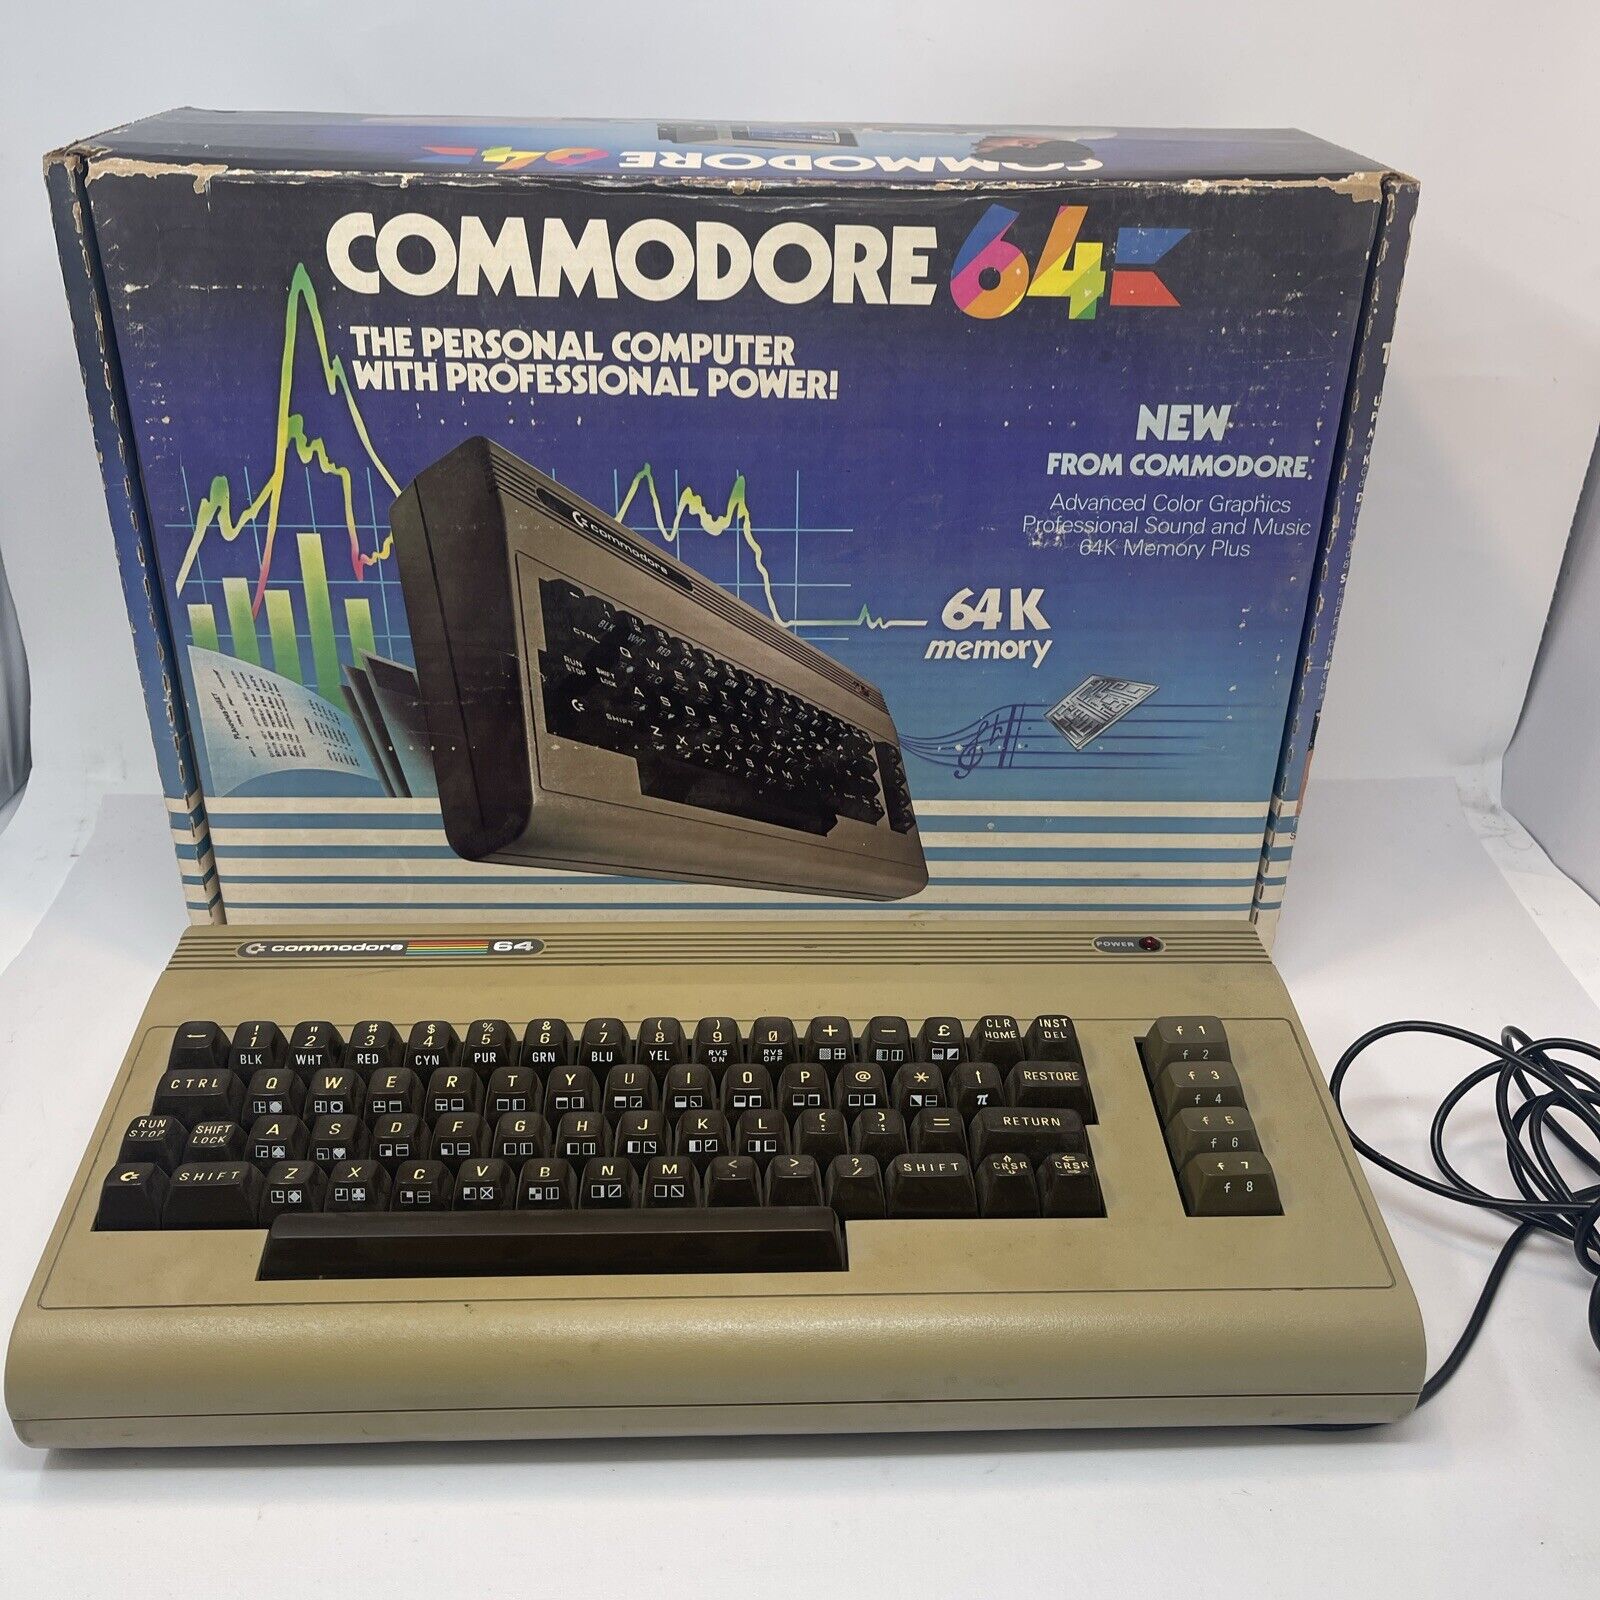 Commodore 64, 1541 Single Floppy Disk, 15 Games, Joystick, Manual - Untested